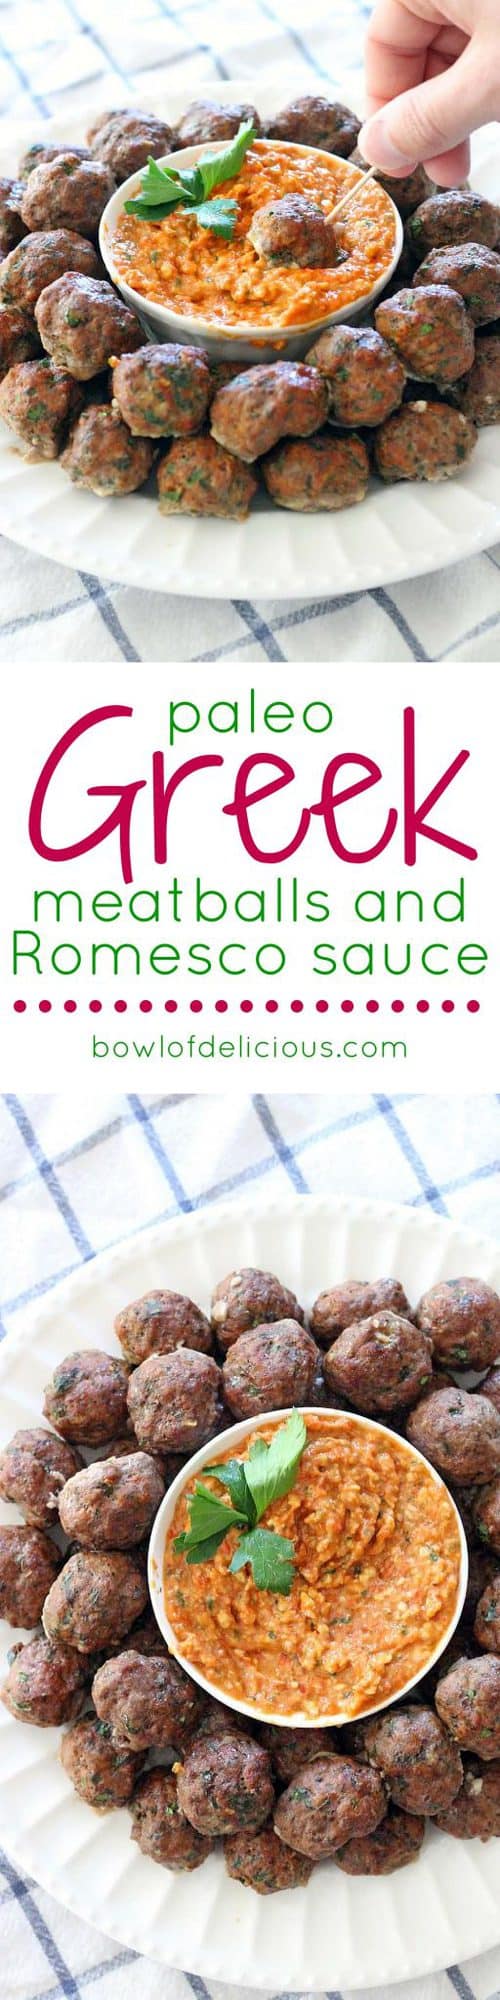 This Paleo/Whole30 baked version of Greek Meatballs (Keftedes) are paired with a super easy Romesco Sauce. The PERFECT make-ahead appetizer for your next party!